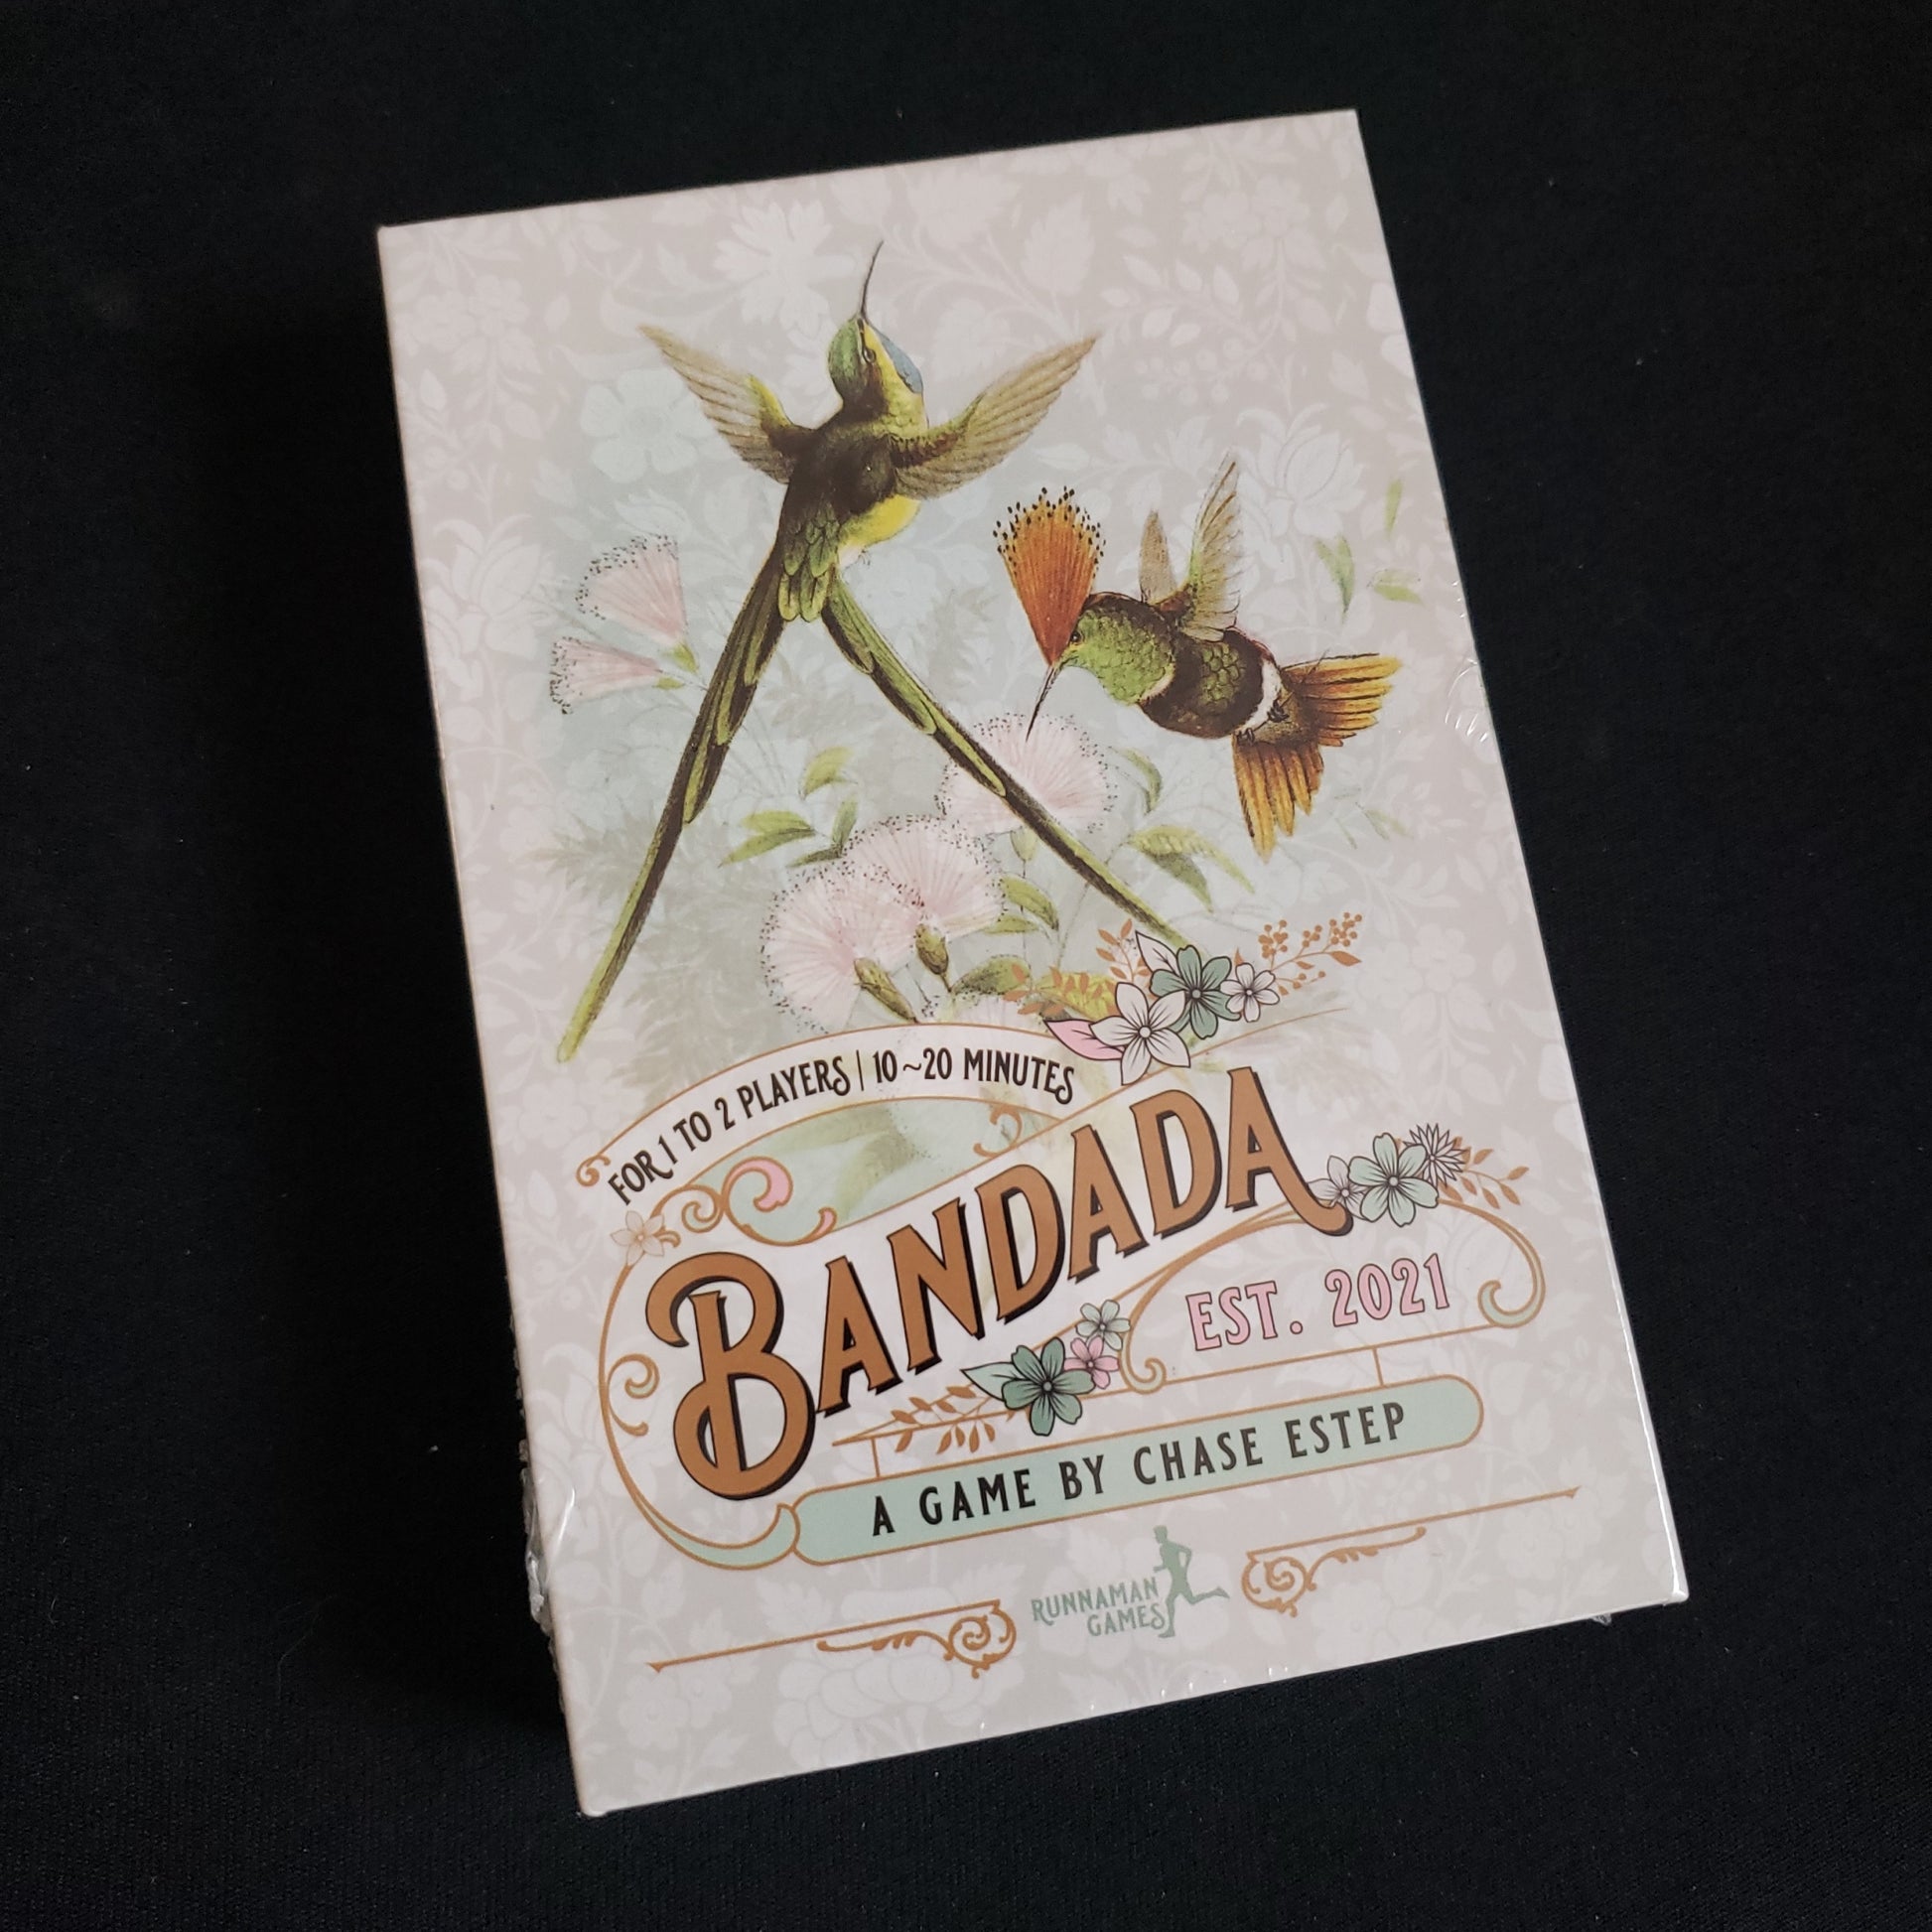 Image shows the front cover of the box of the Bandada card game